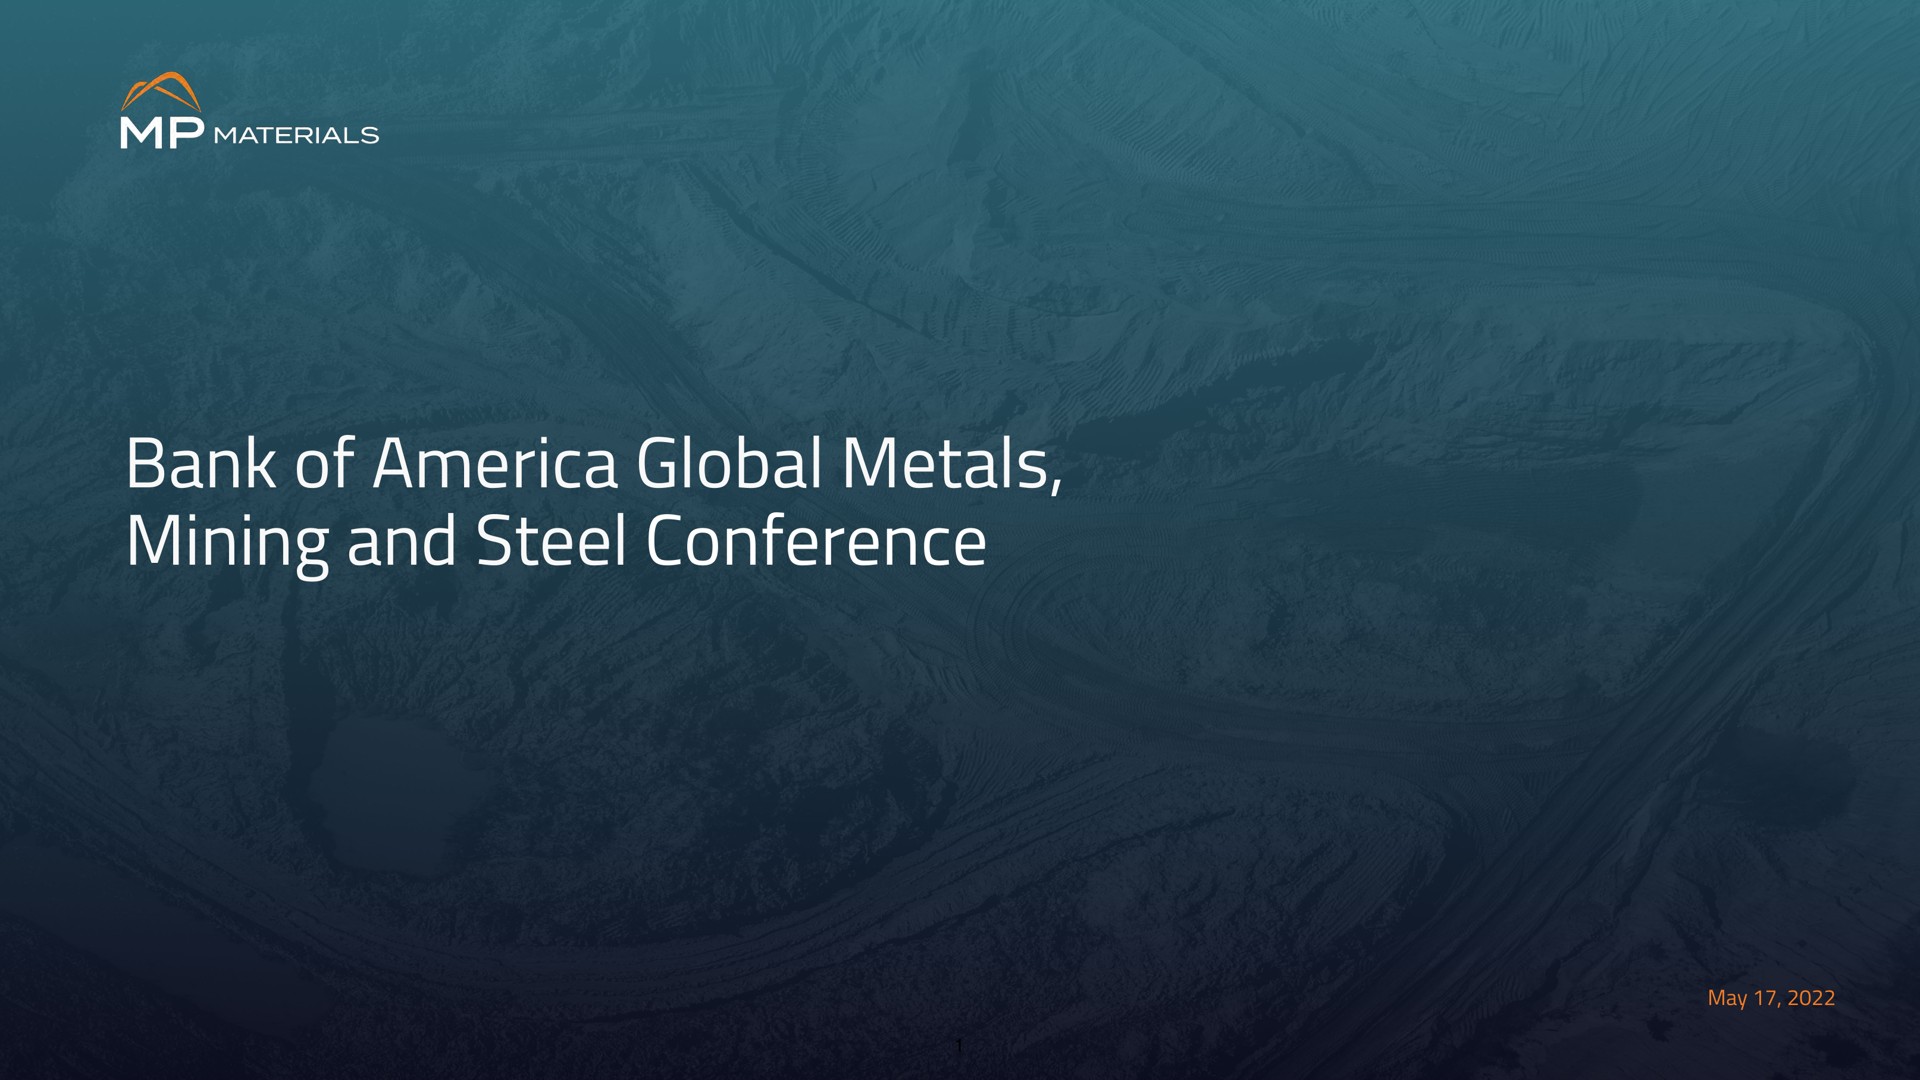 bank of global metals mining and steel conference | MP Materials